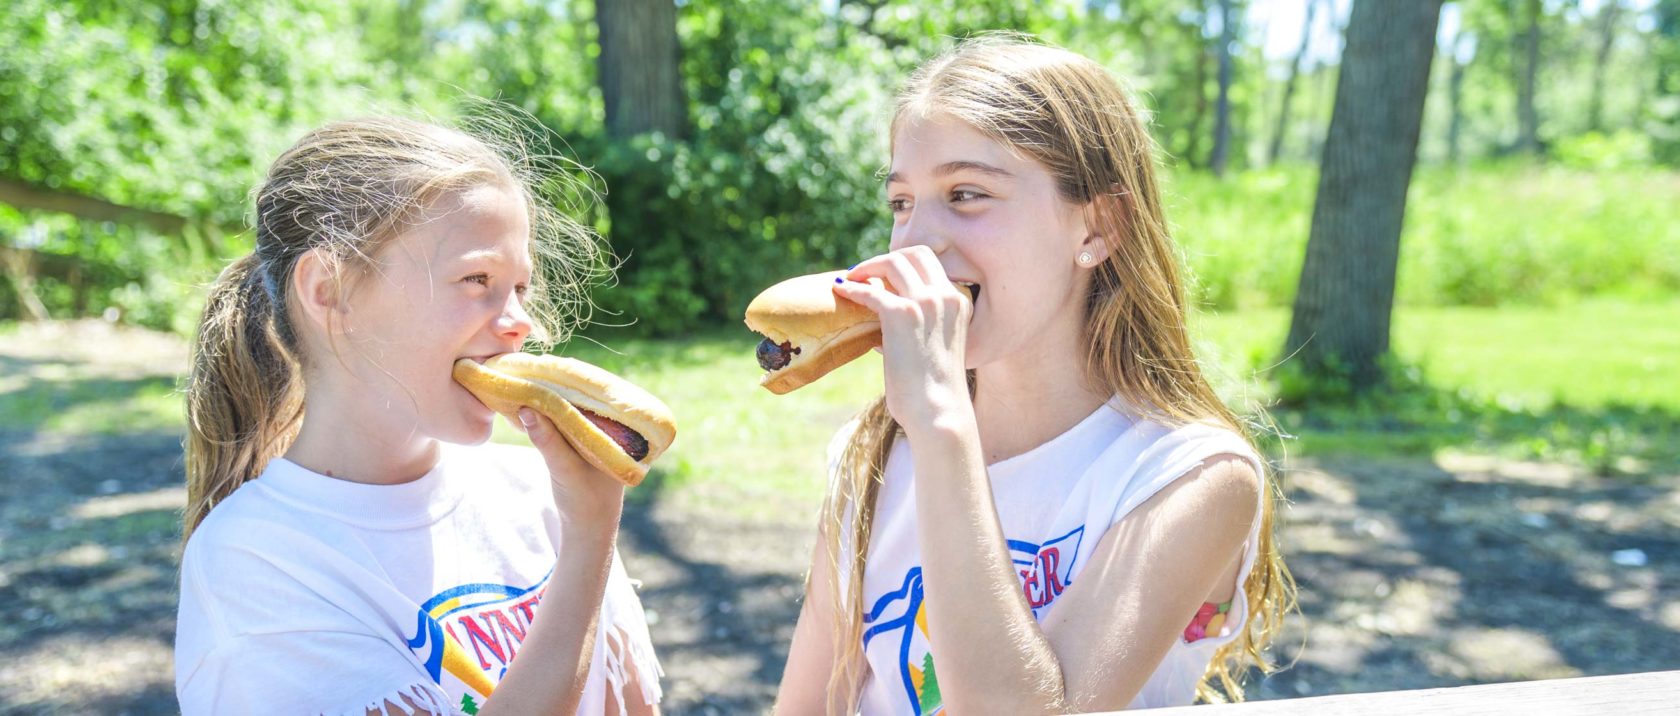 Two girl campers eating hot dogs at a table